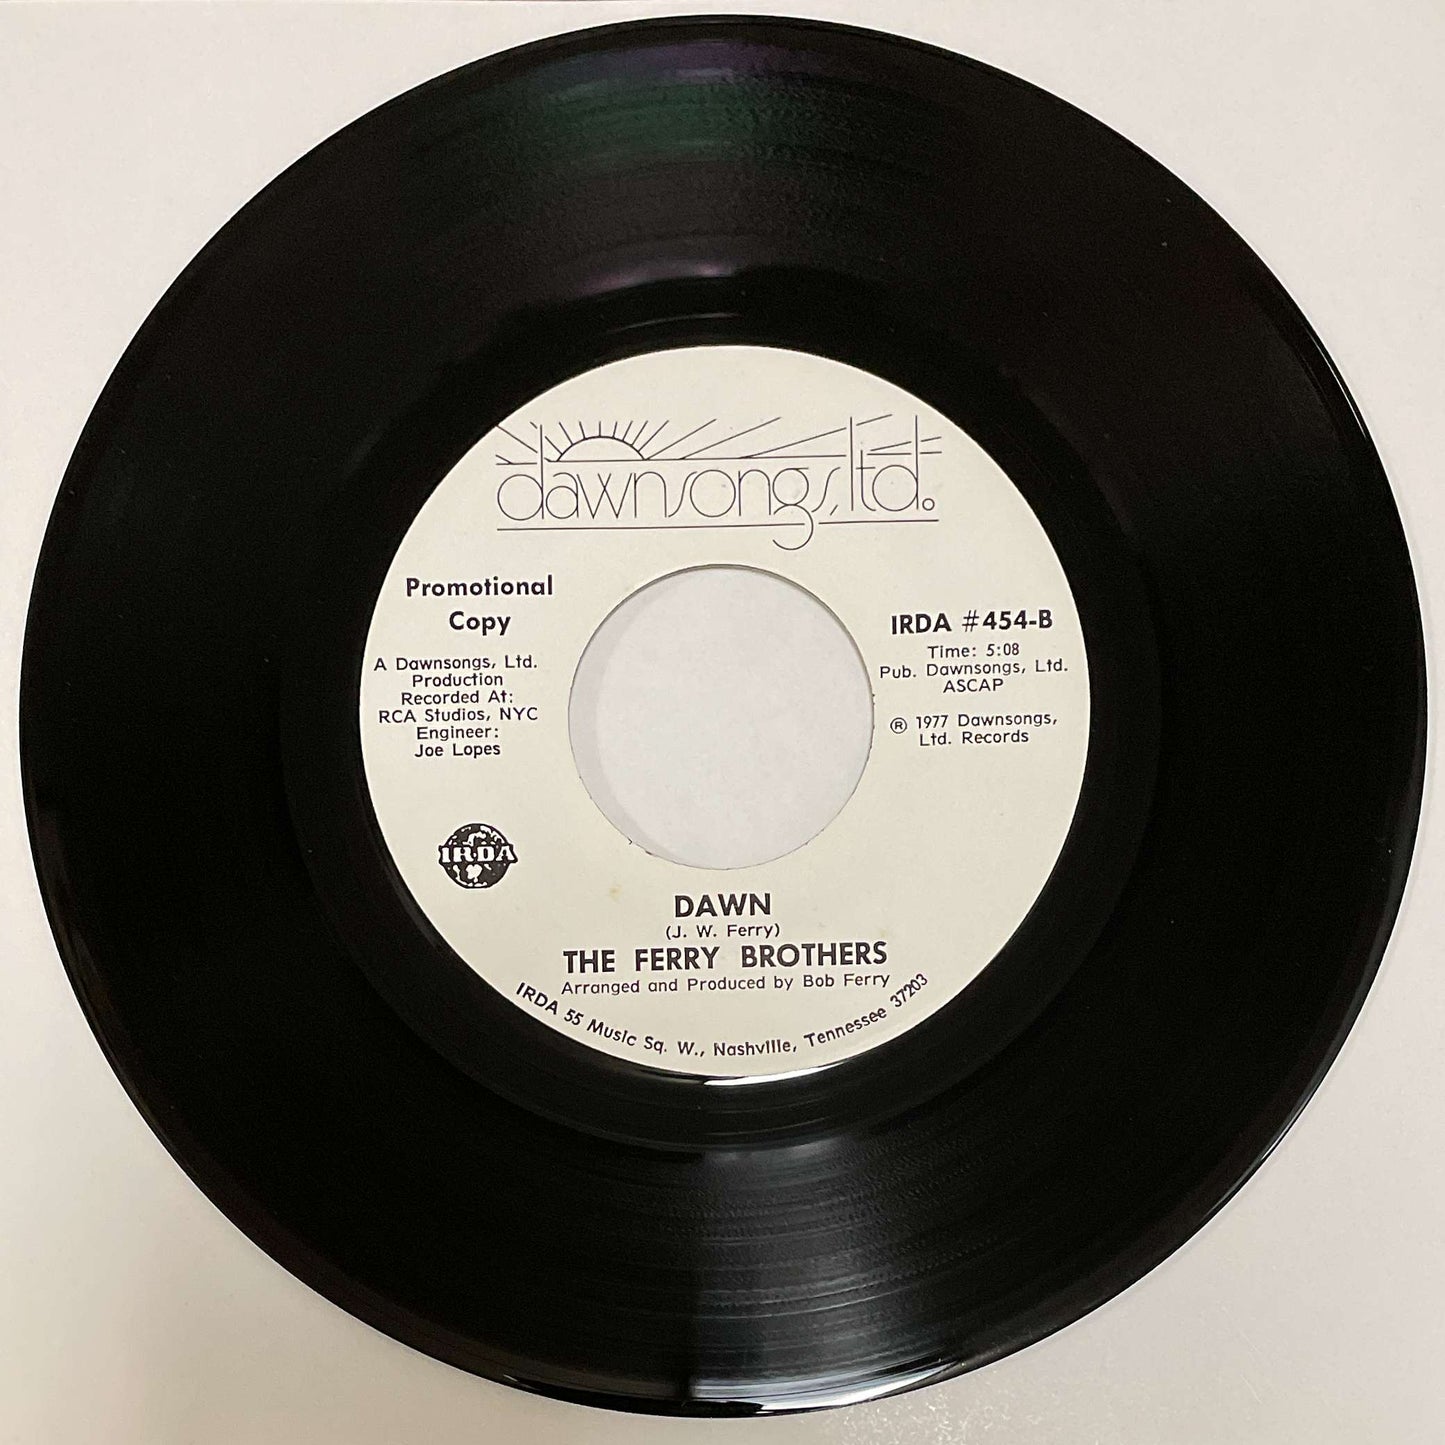 The Ferry Brothers – 'Til Mornin' Comes ( Dawnsongs, Ltd. ) 45